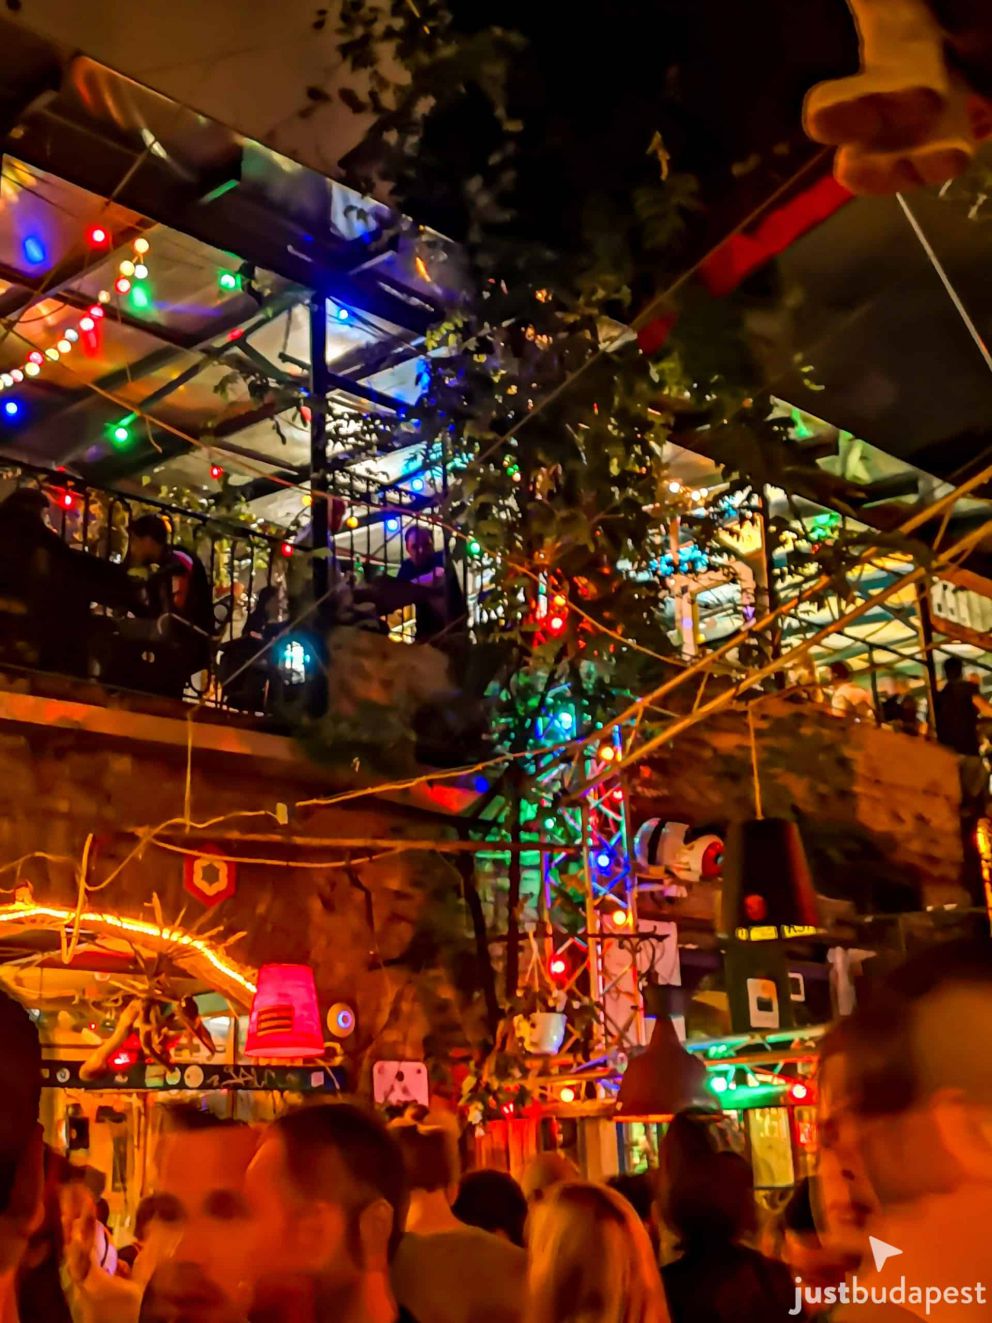 The colorful and surreal interior of Szimpla Kert ruin pub in Budapest